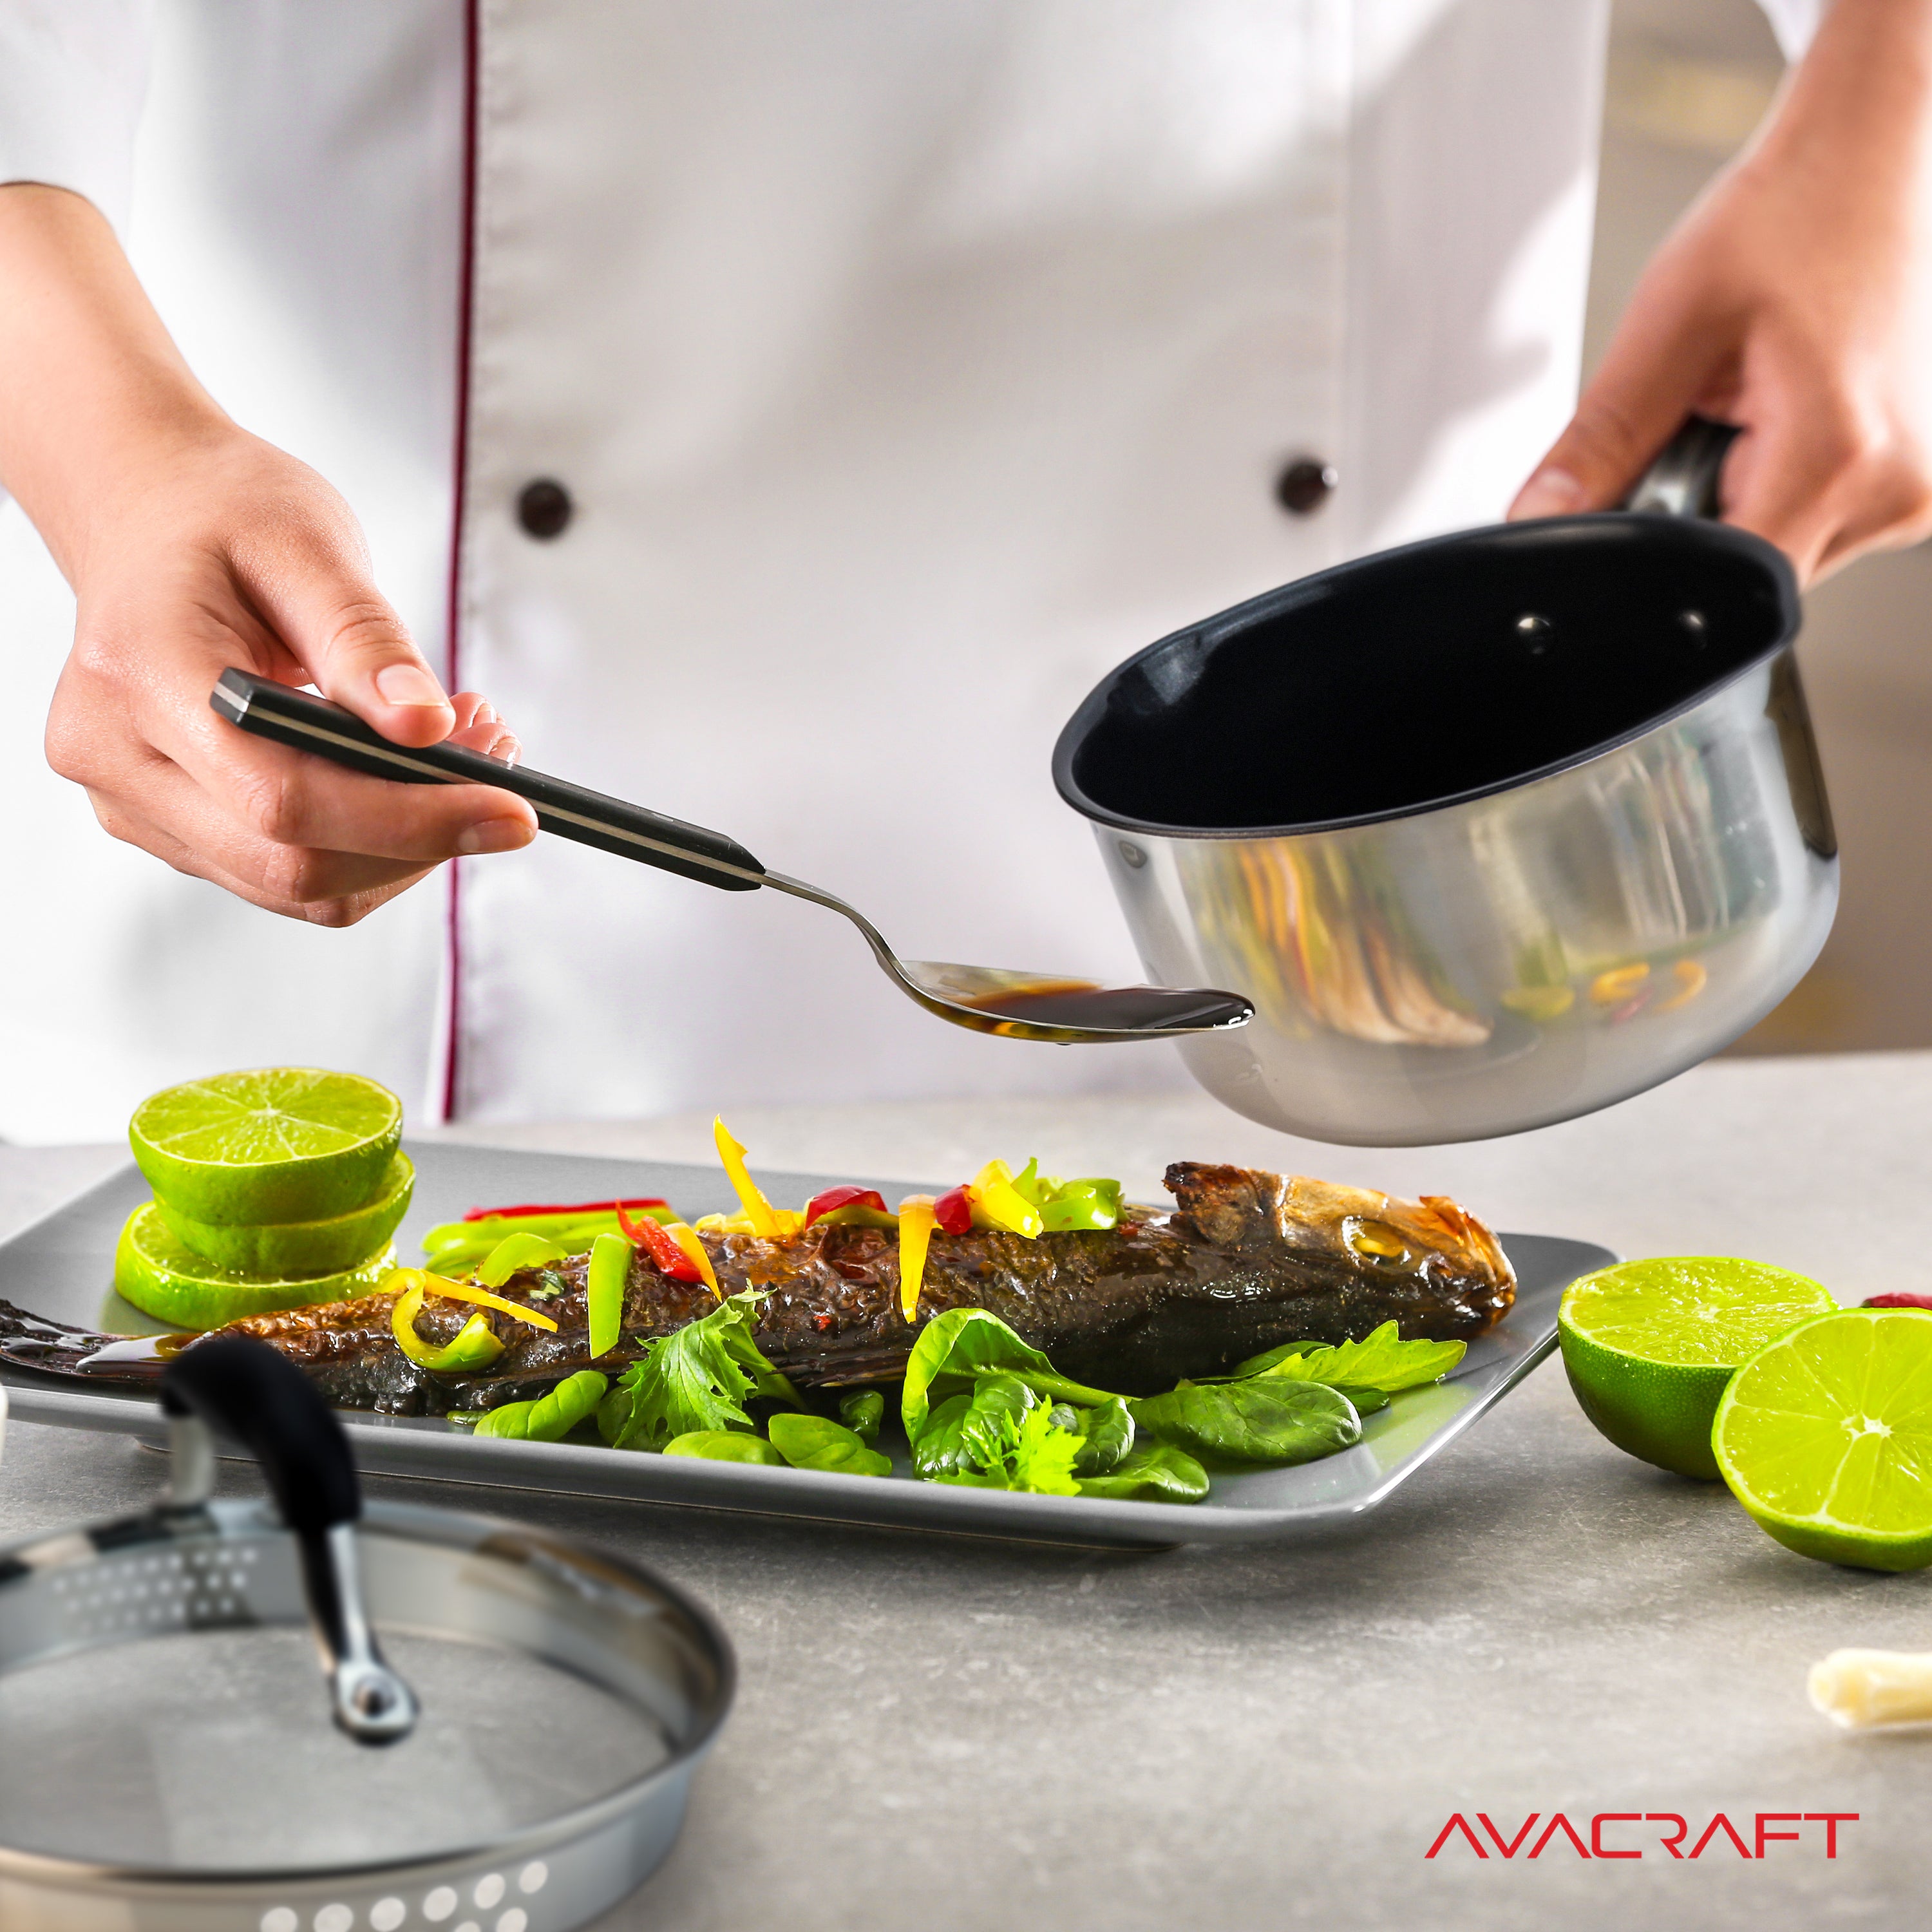 AVACRAFT 9 inch Nonstick Everyday Pan, Ceramic MultiClad Stainless Steel, 100 PTFE, PFOA Toxins Free, Ceramic Chefs Pan with GLA